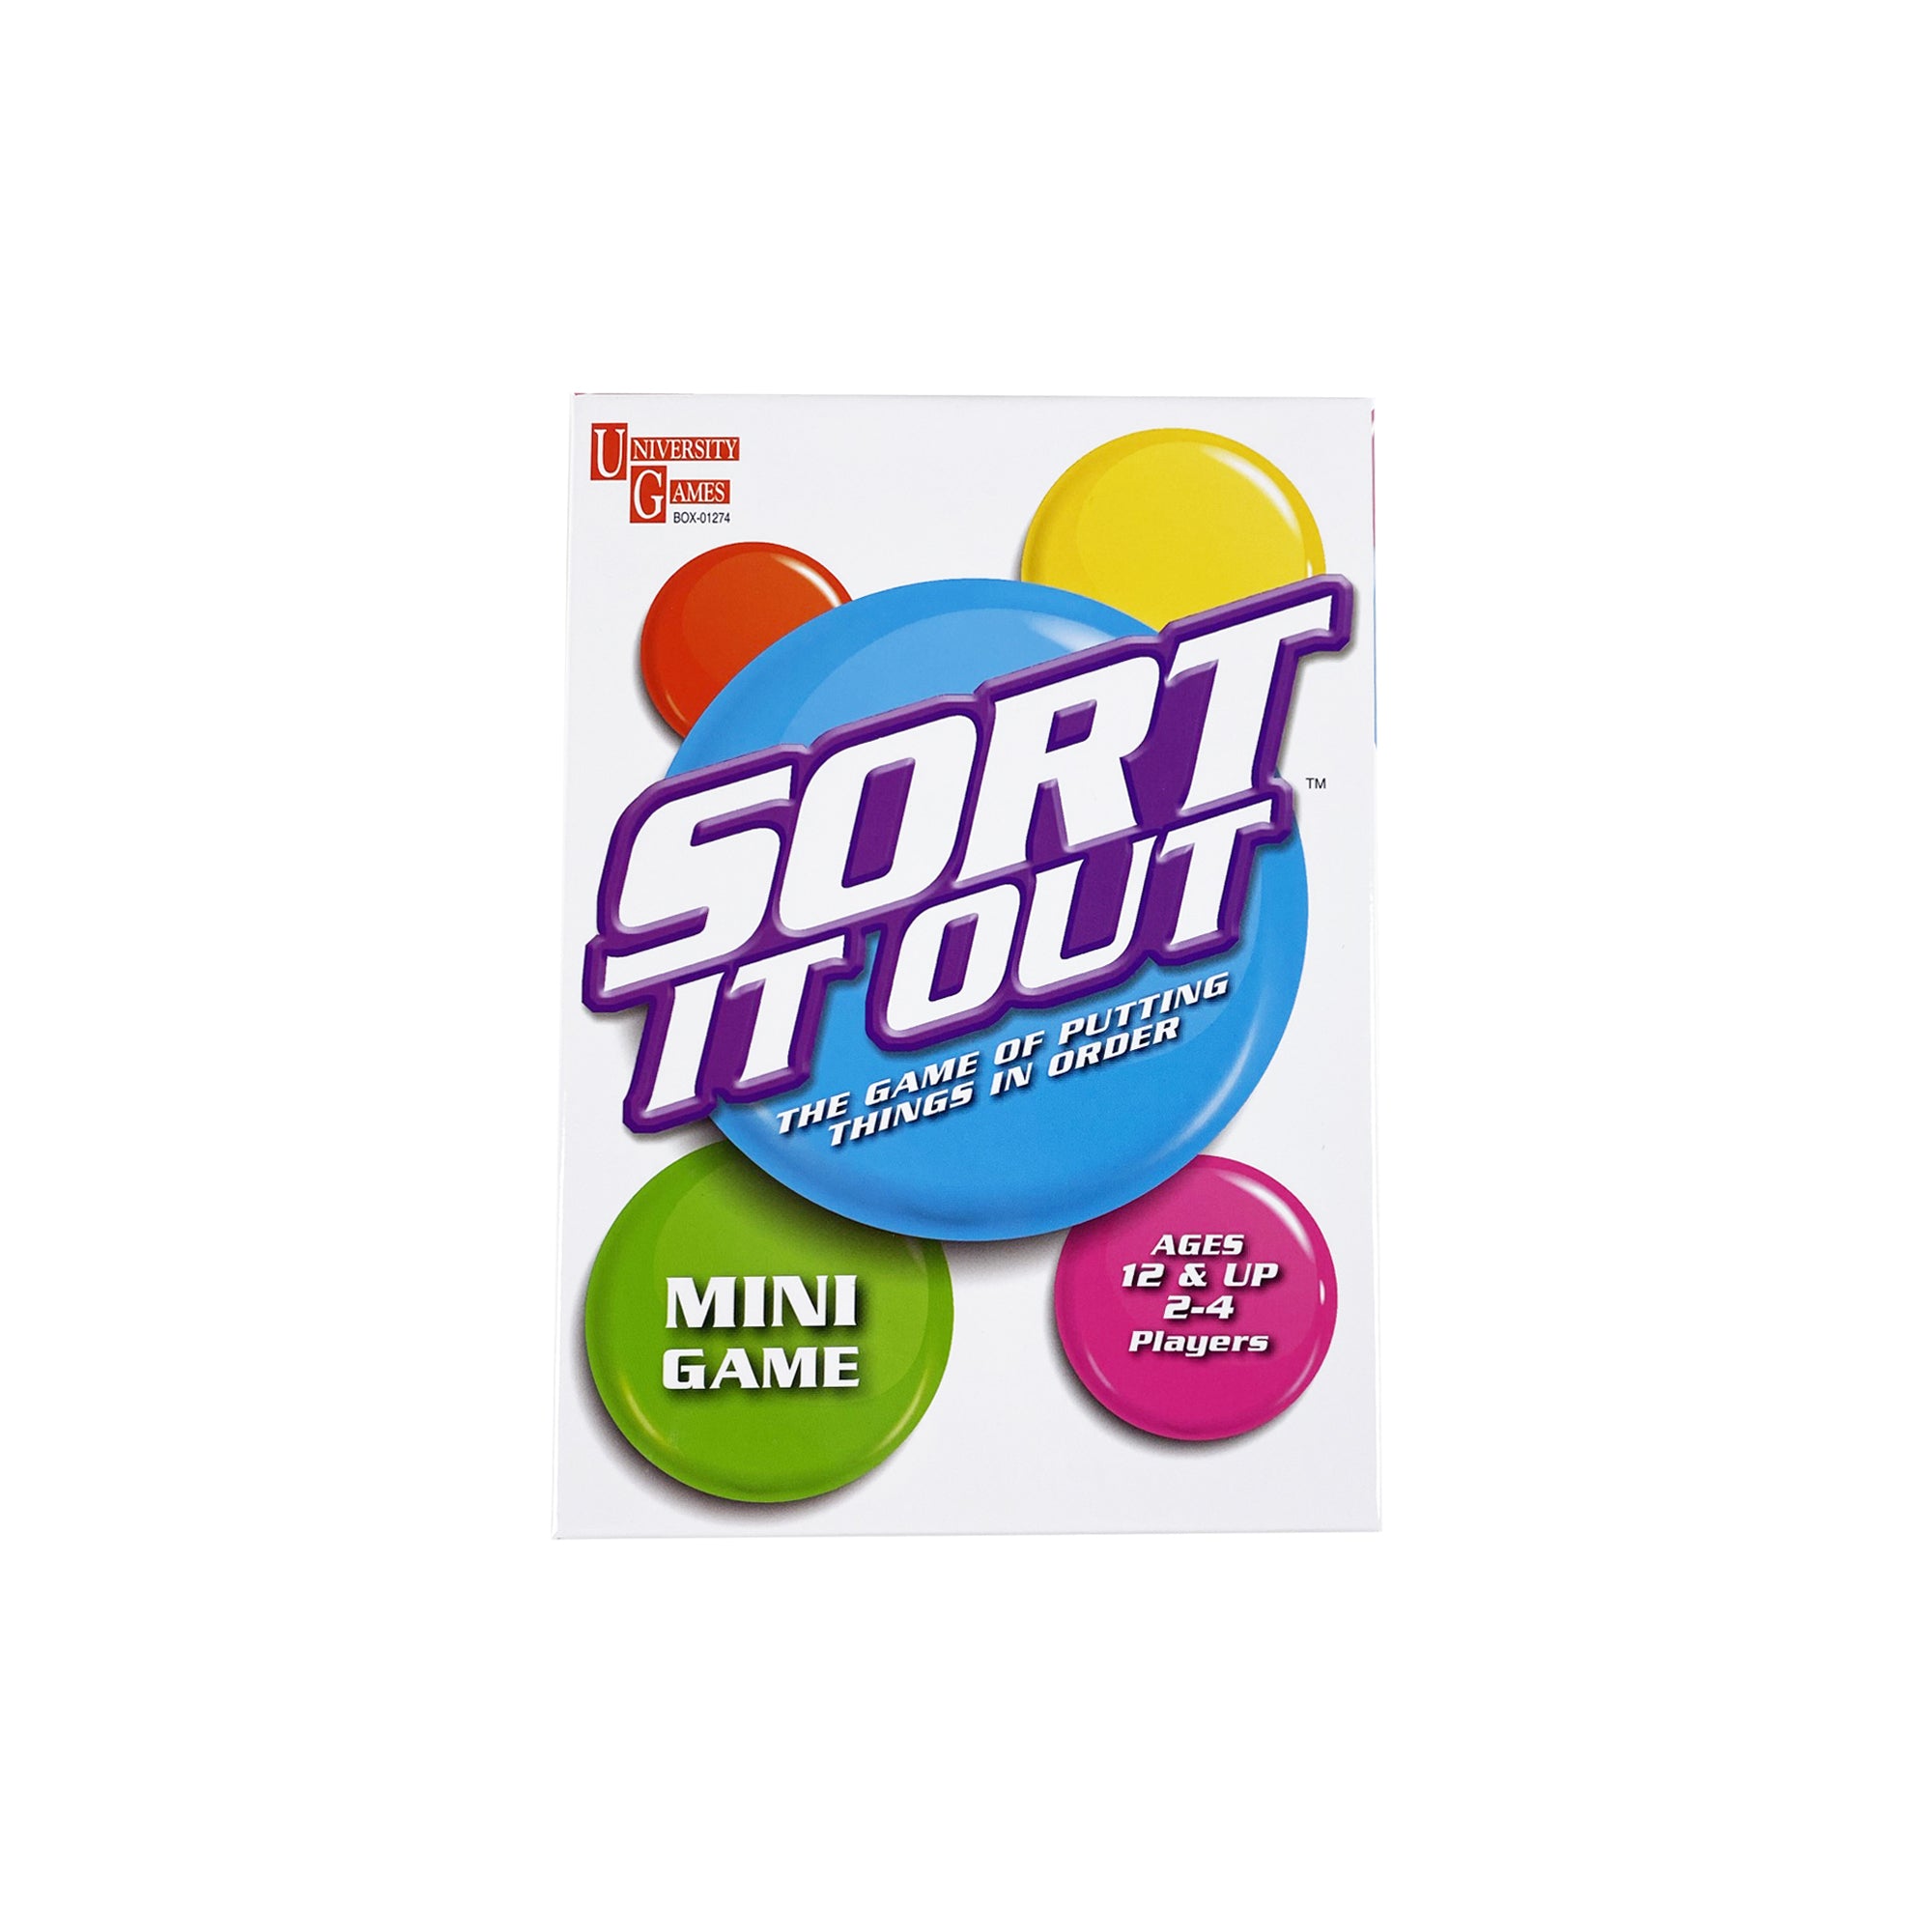 Sort It Out Mini Card Game